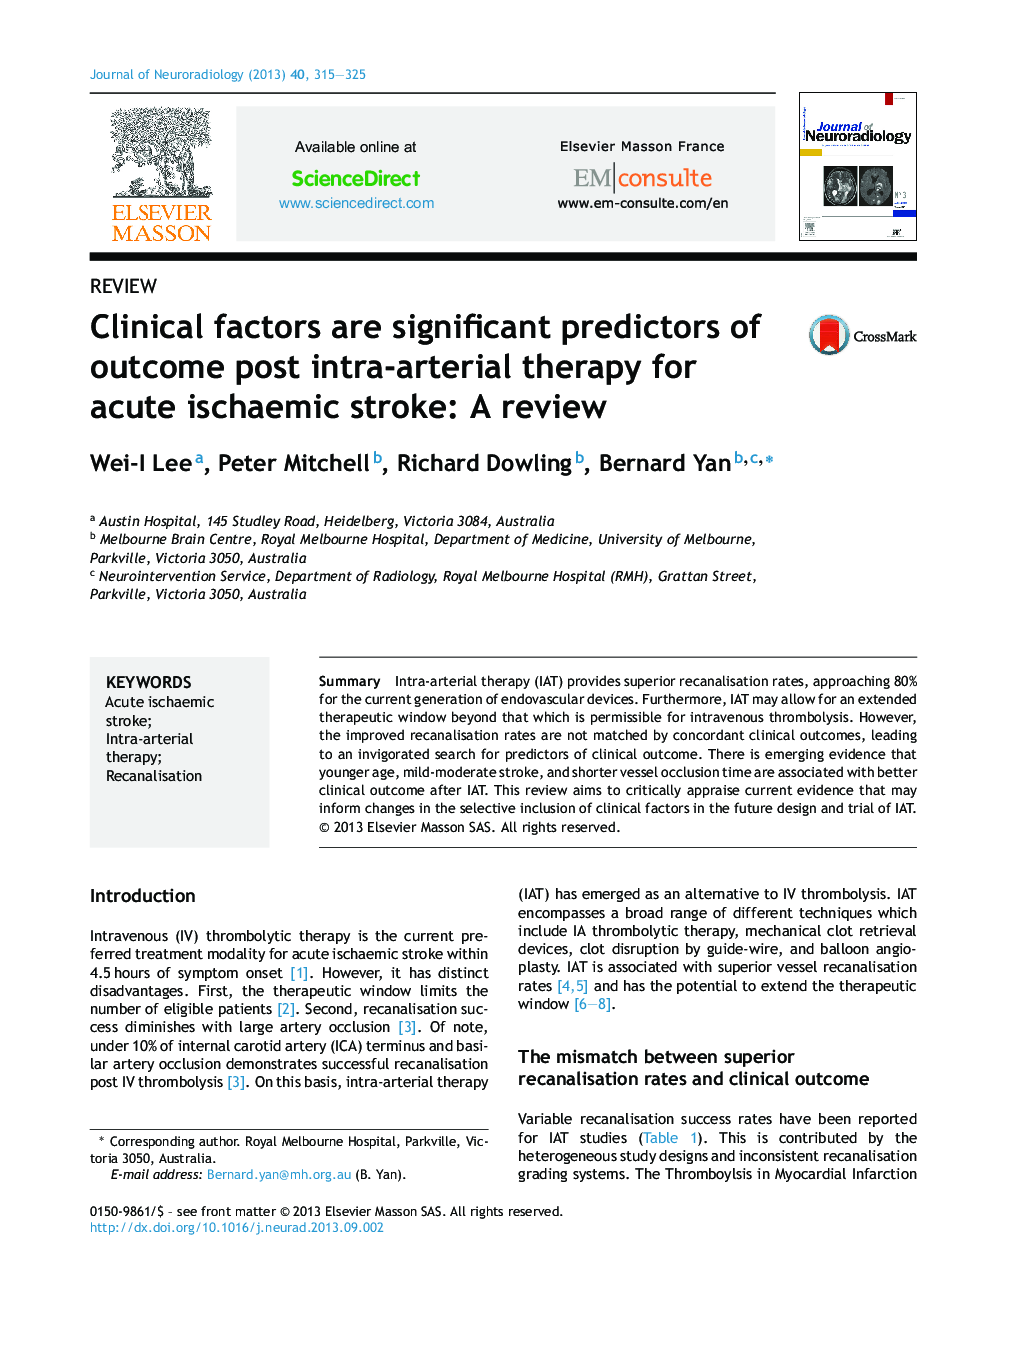 Clinical factors are significant predictors of outcome post intra-arterial therapy for acute ischaemic stroke: A review